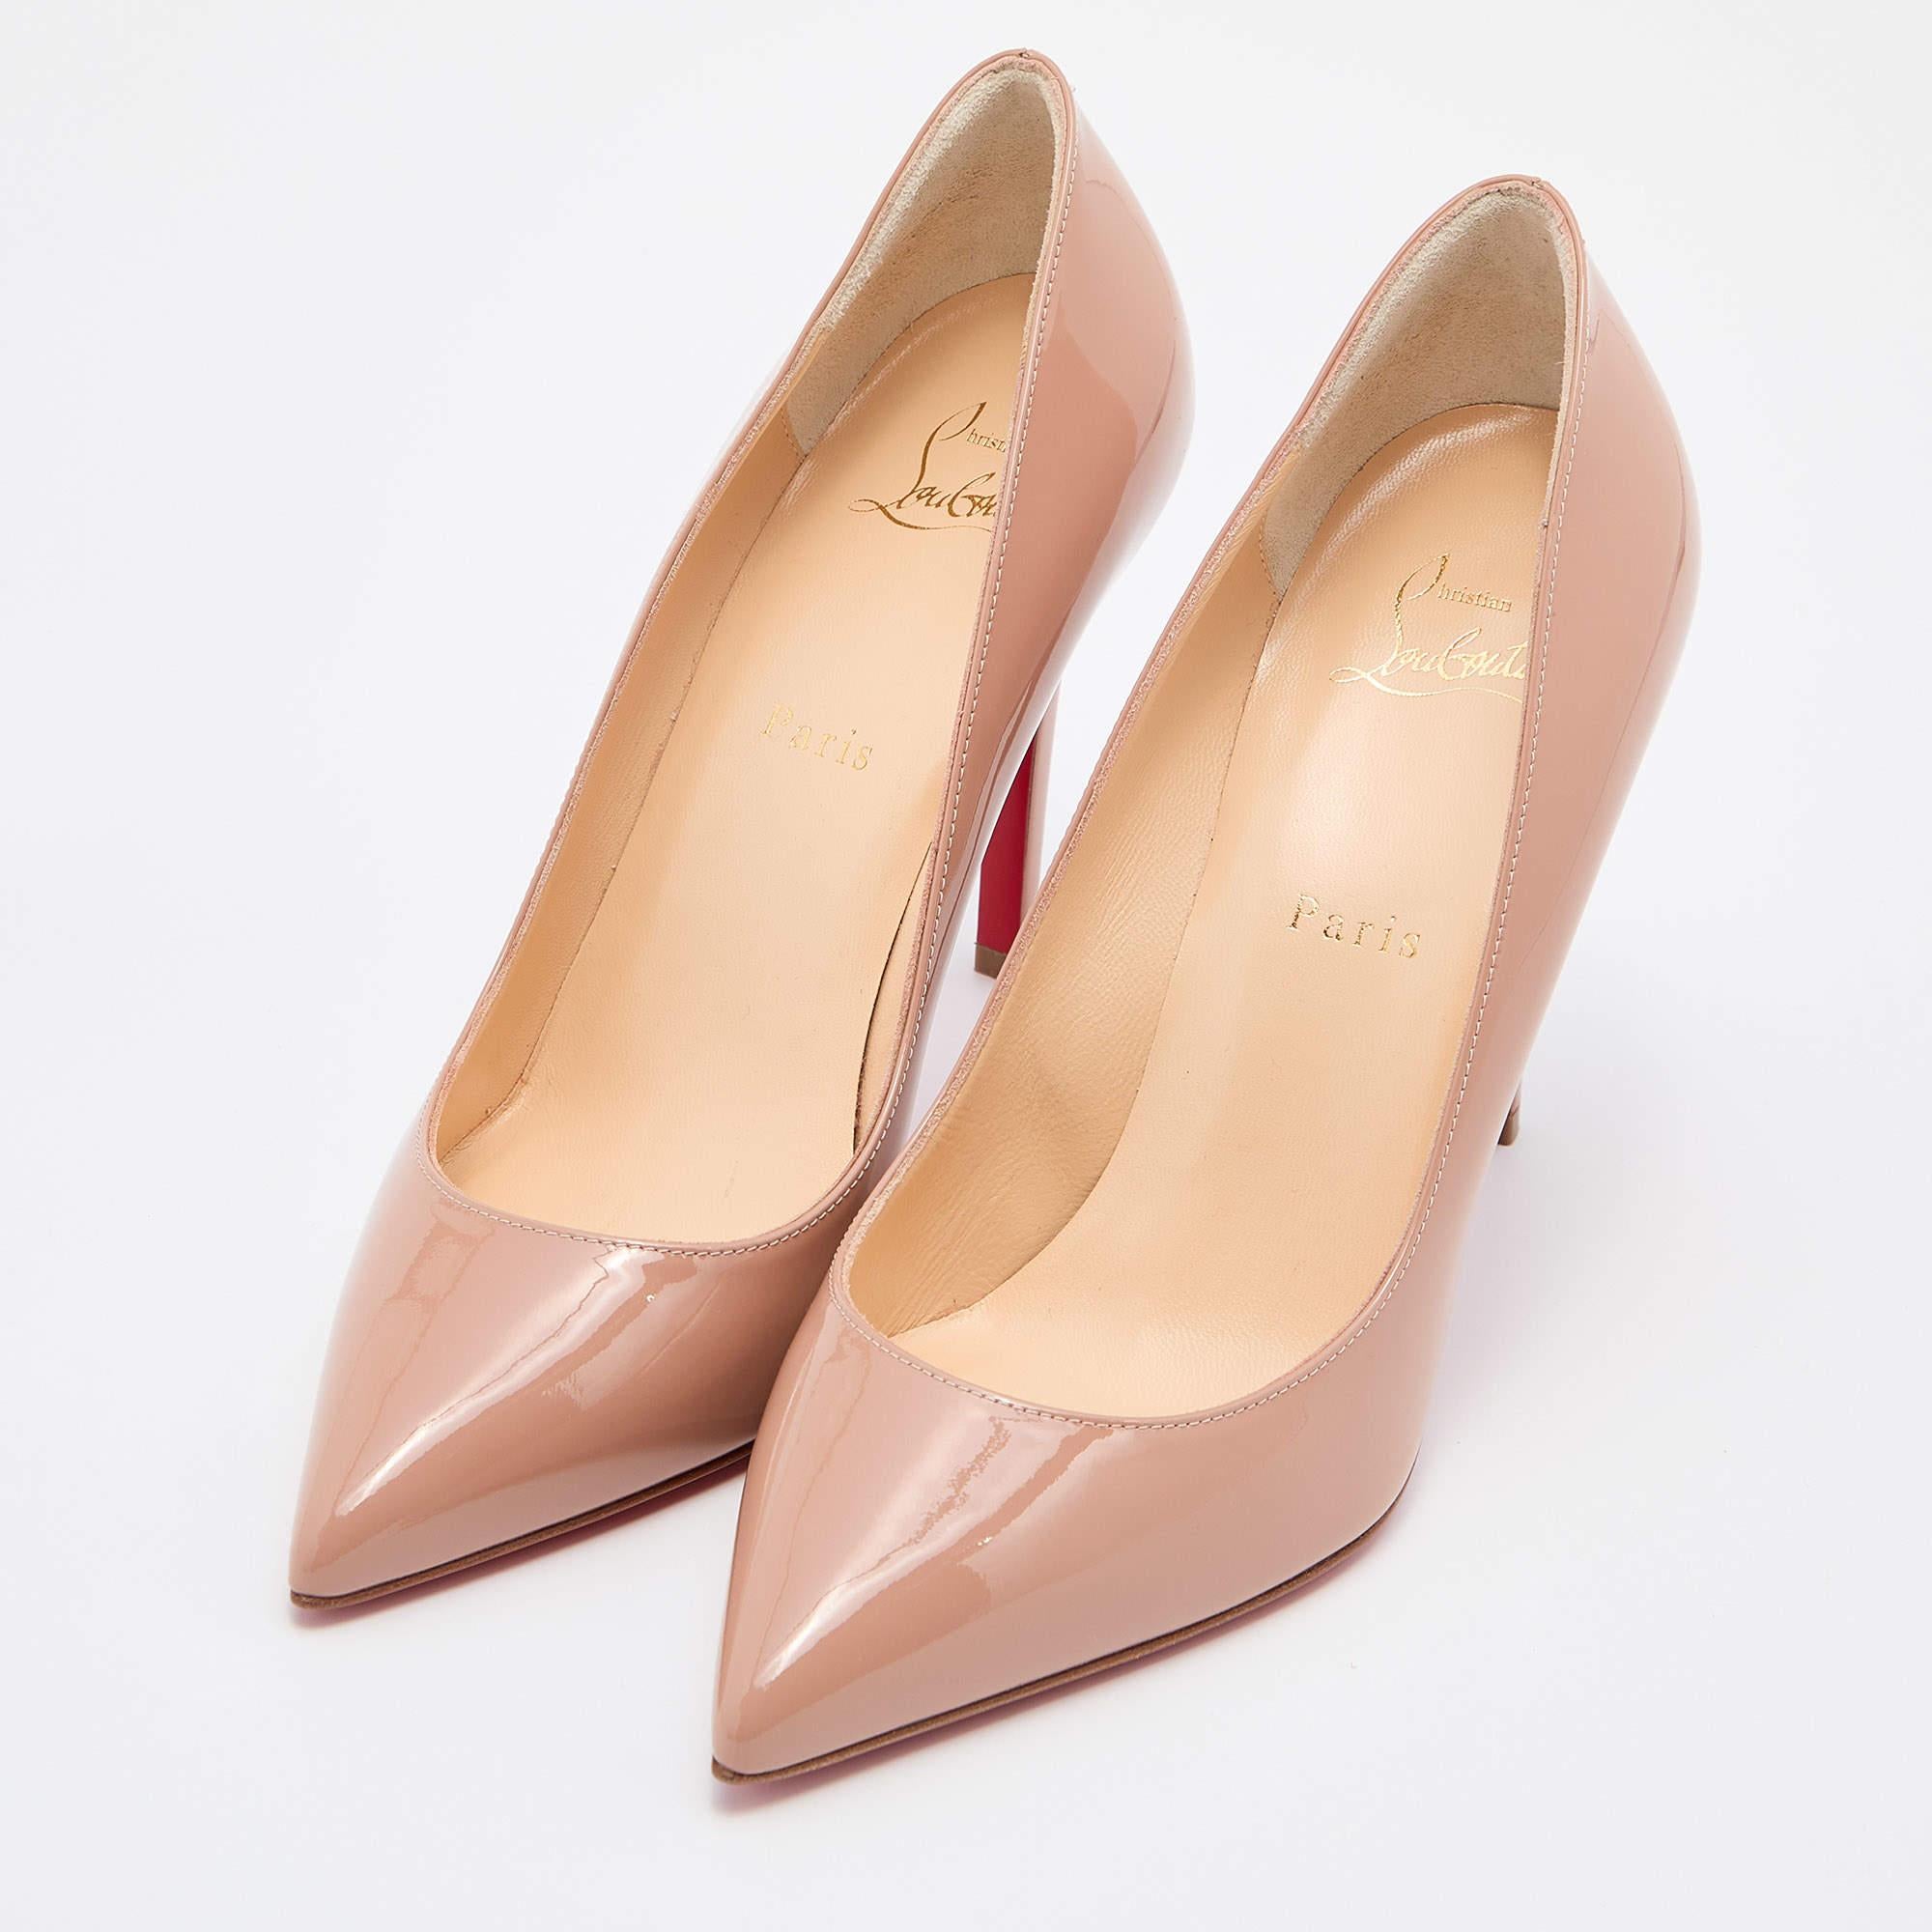 Women's Christian Louboutin Nude Patent Leather Pigalle Pumps Size 39